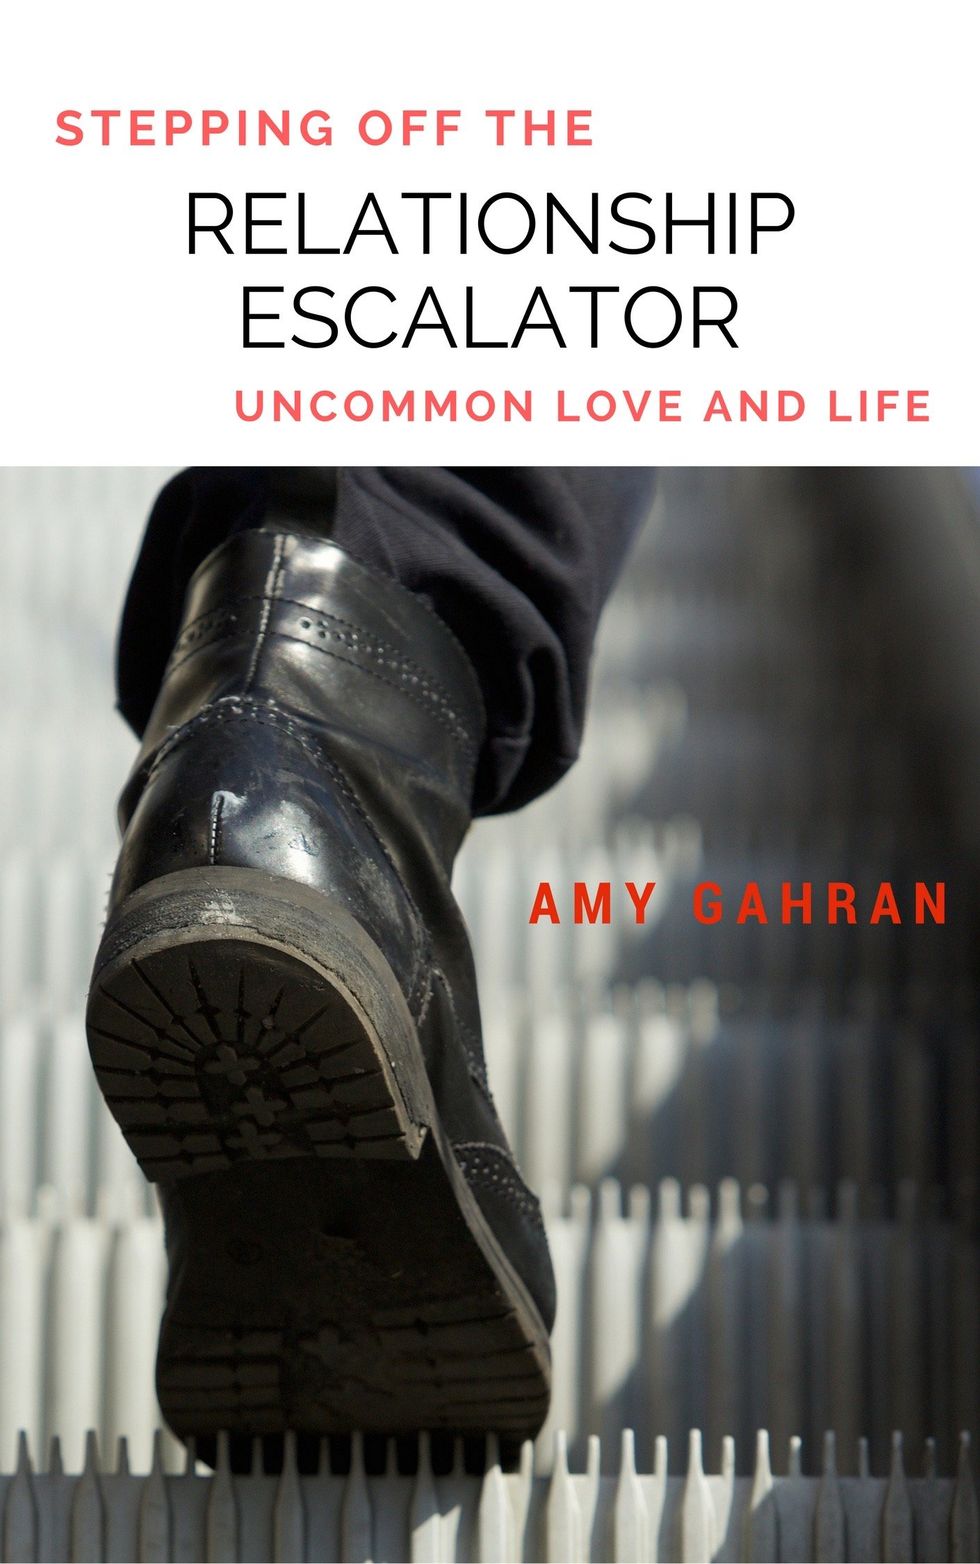 Stepping Off the Relationship Escalator by Amy Gahran